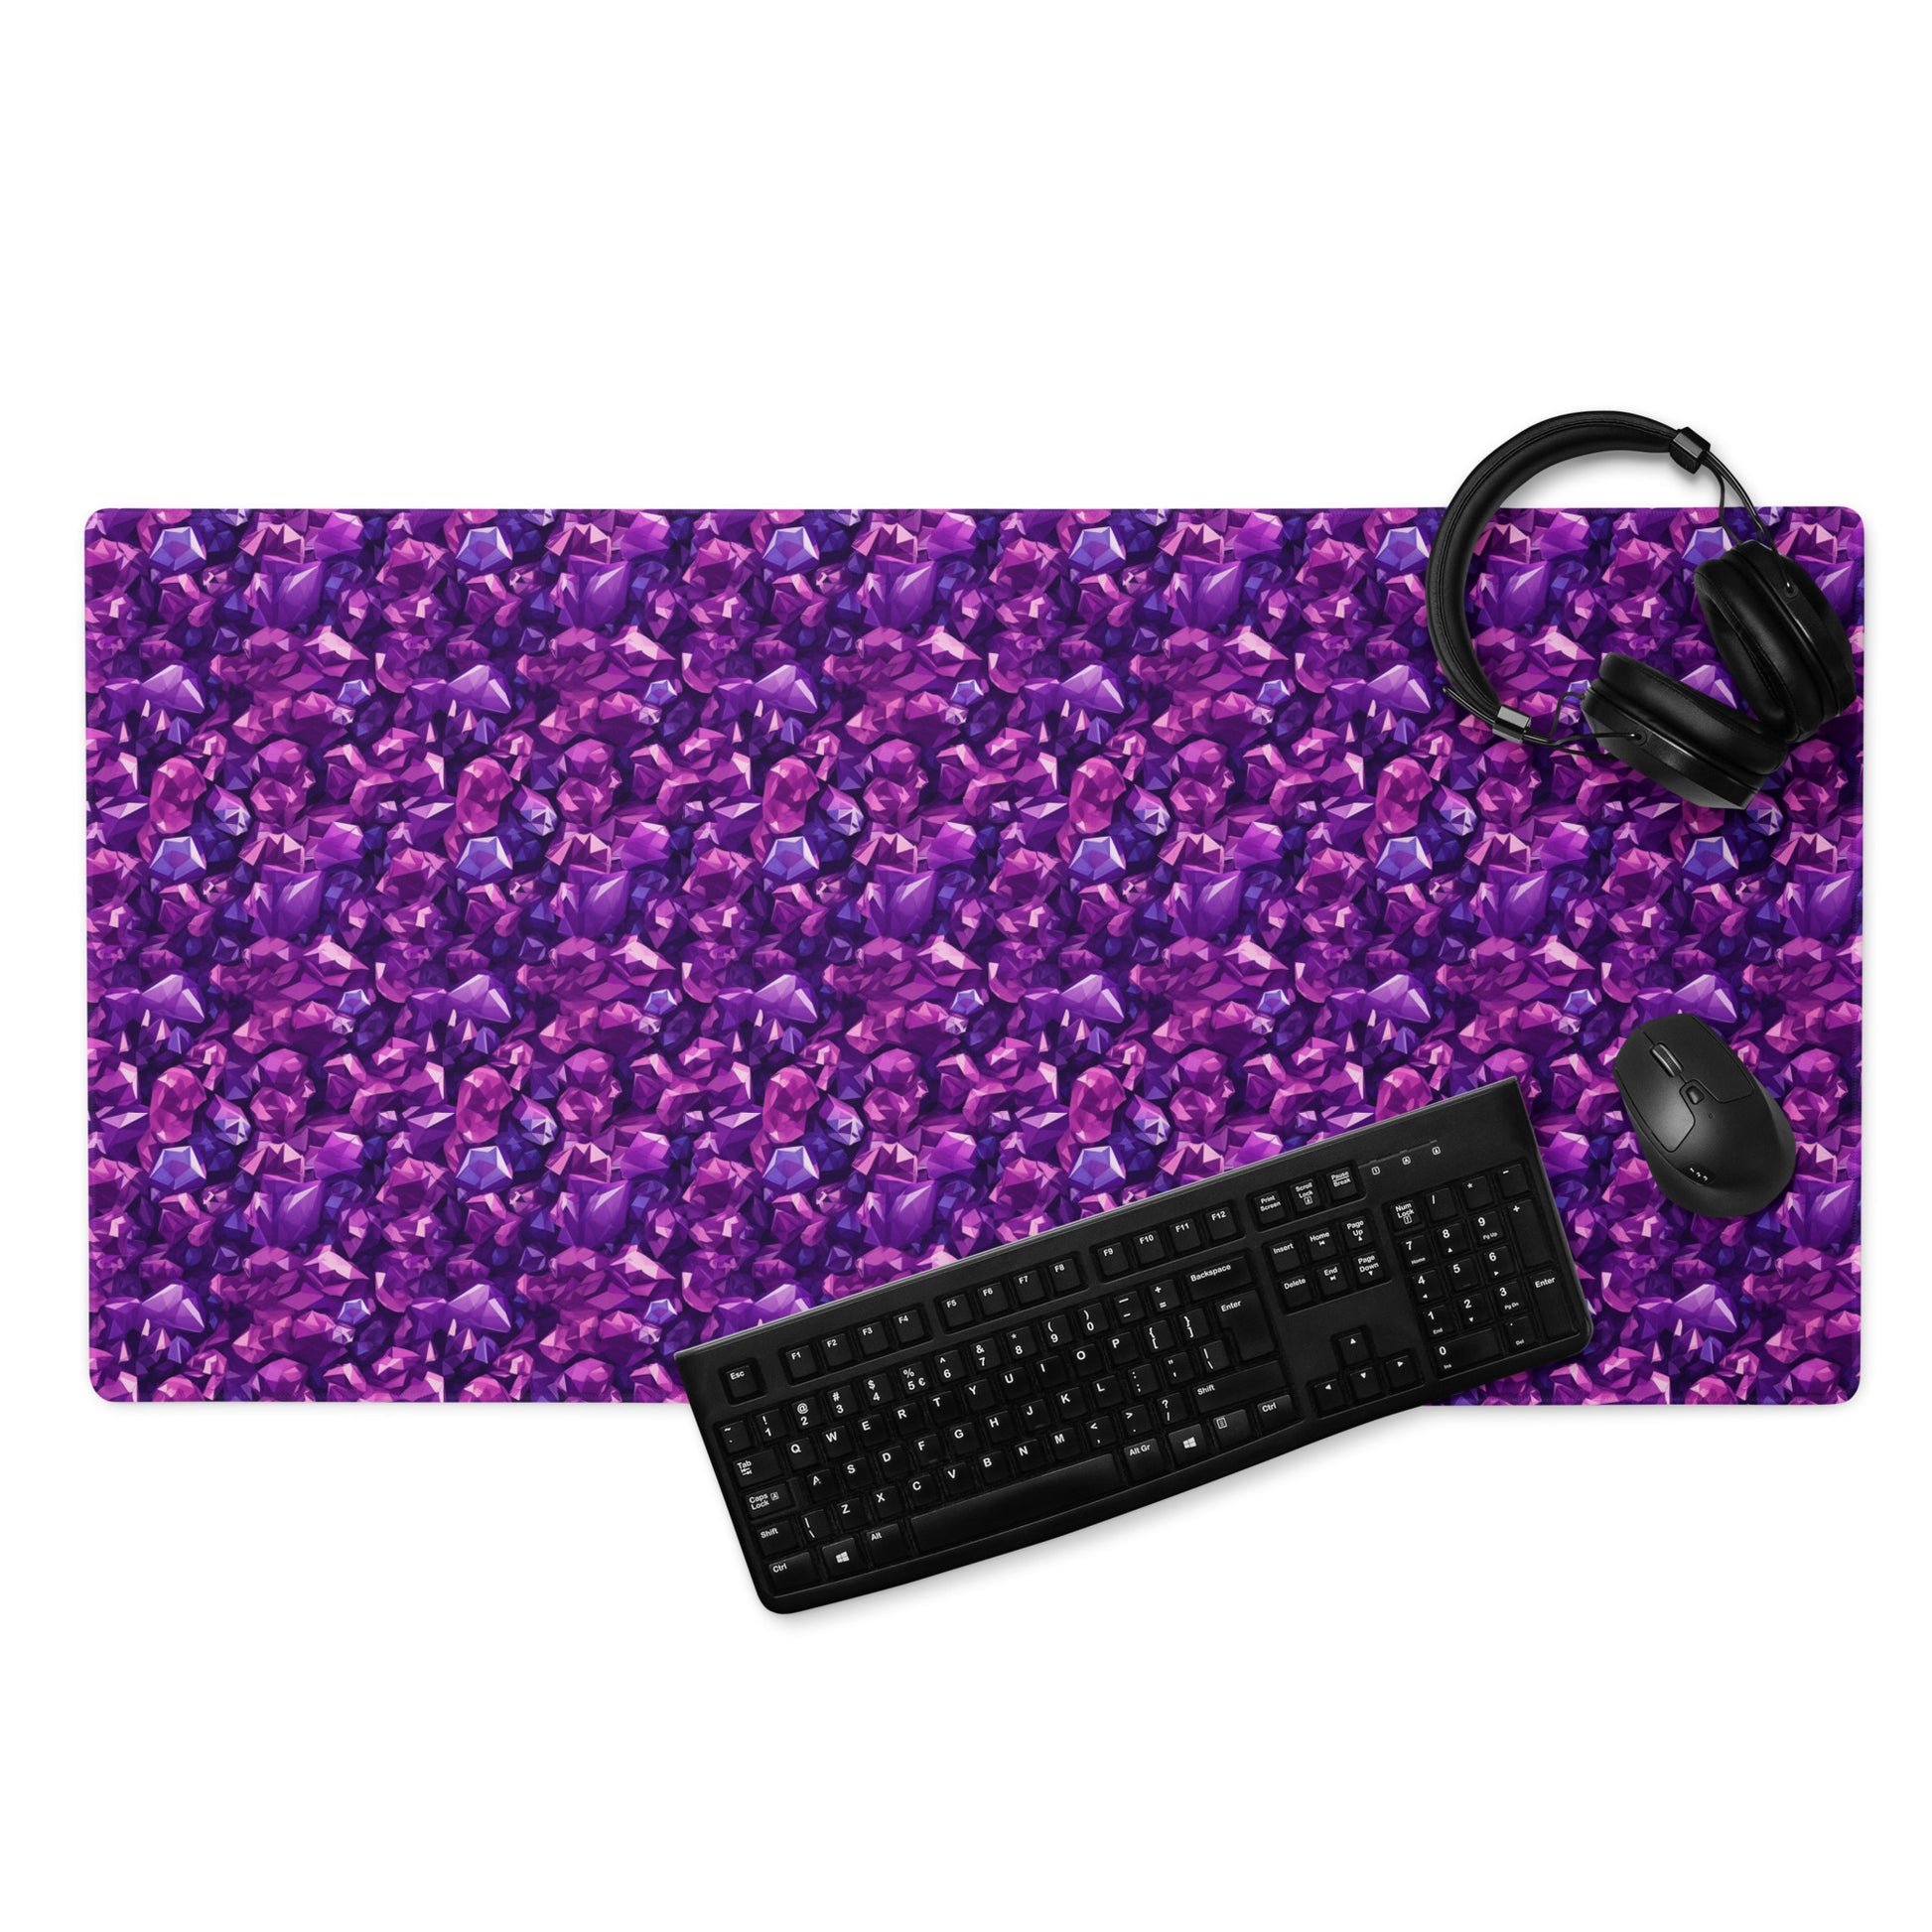 A 36" x 18" gaming desk pad with purple crystals. A keyboard, mouse, and headphones sit on it.